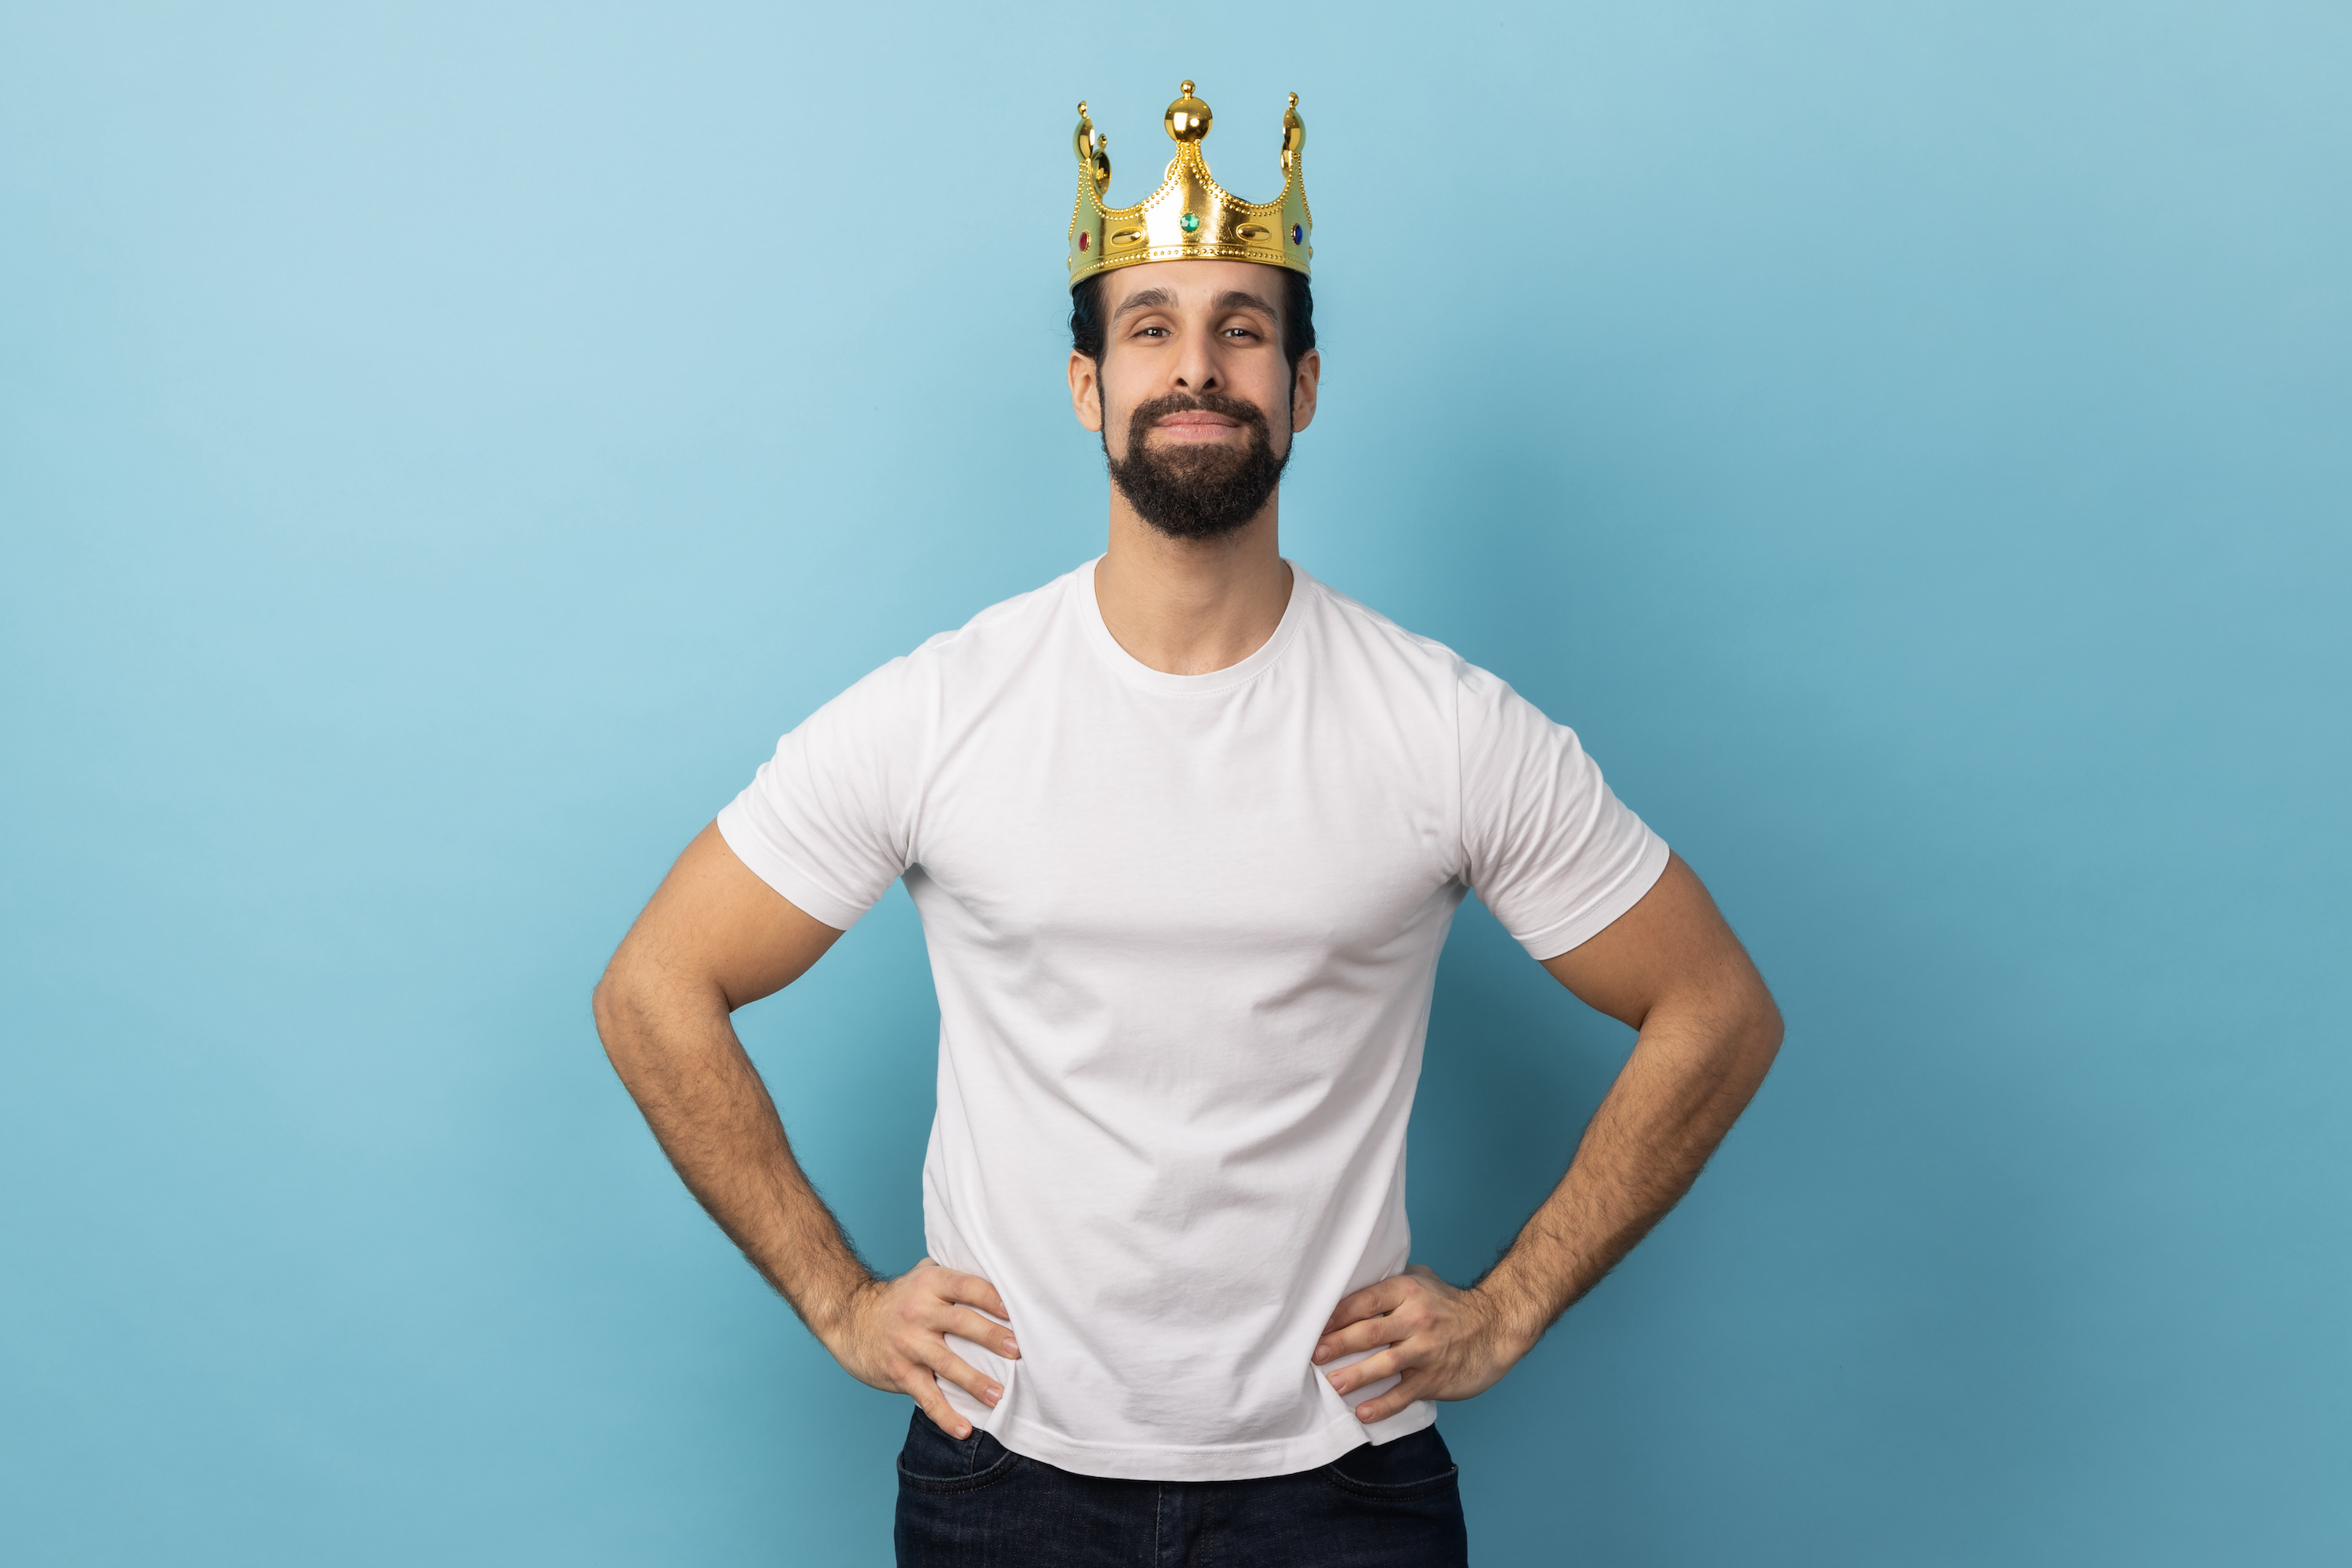 A man wearing a crown while having his hands on his waist